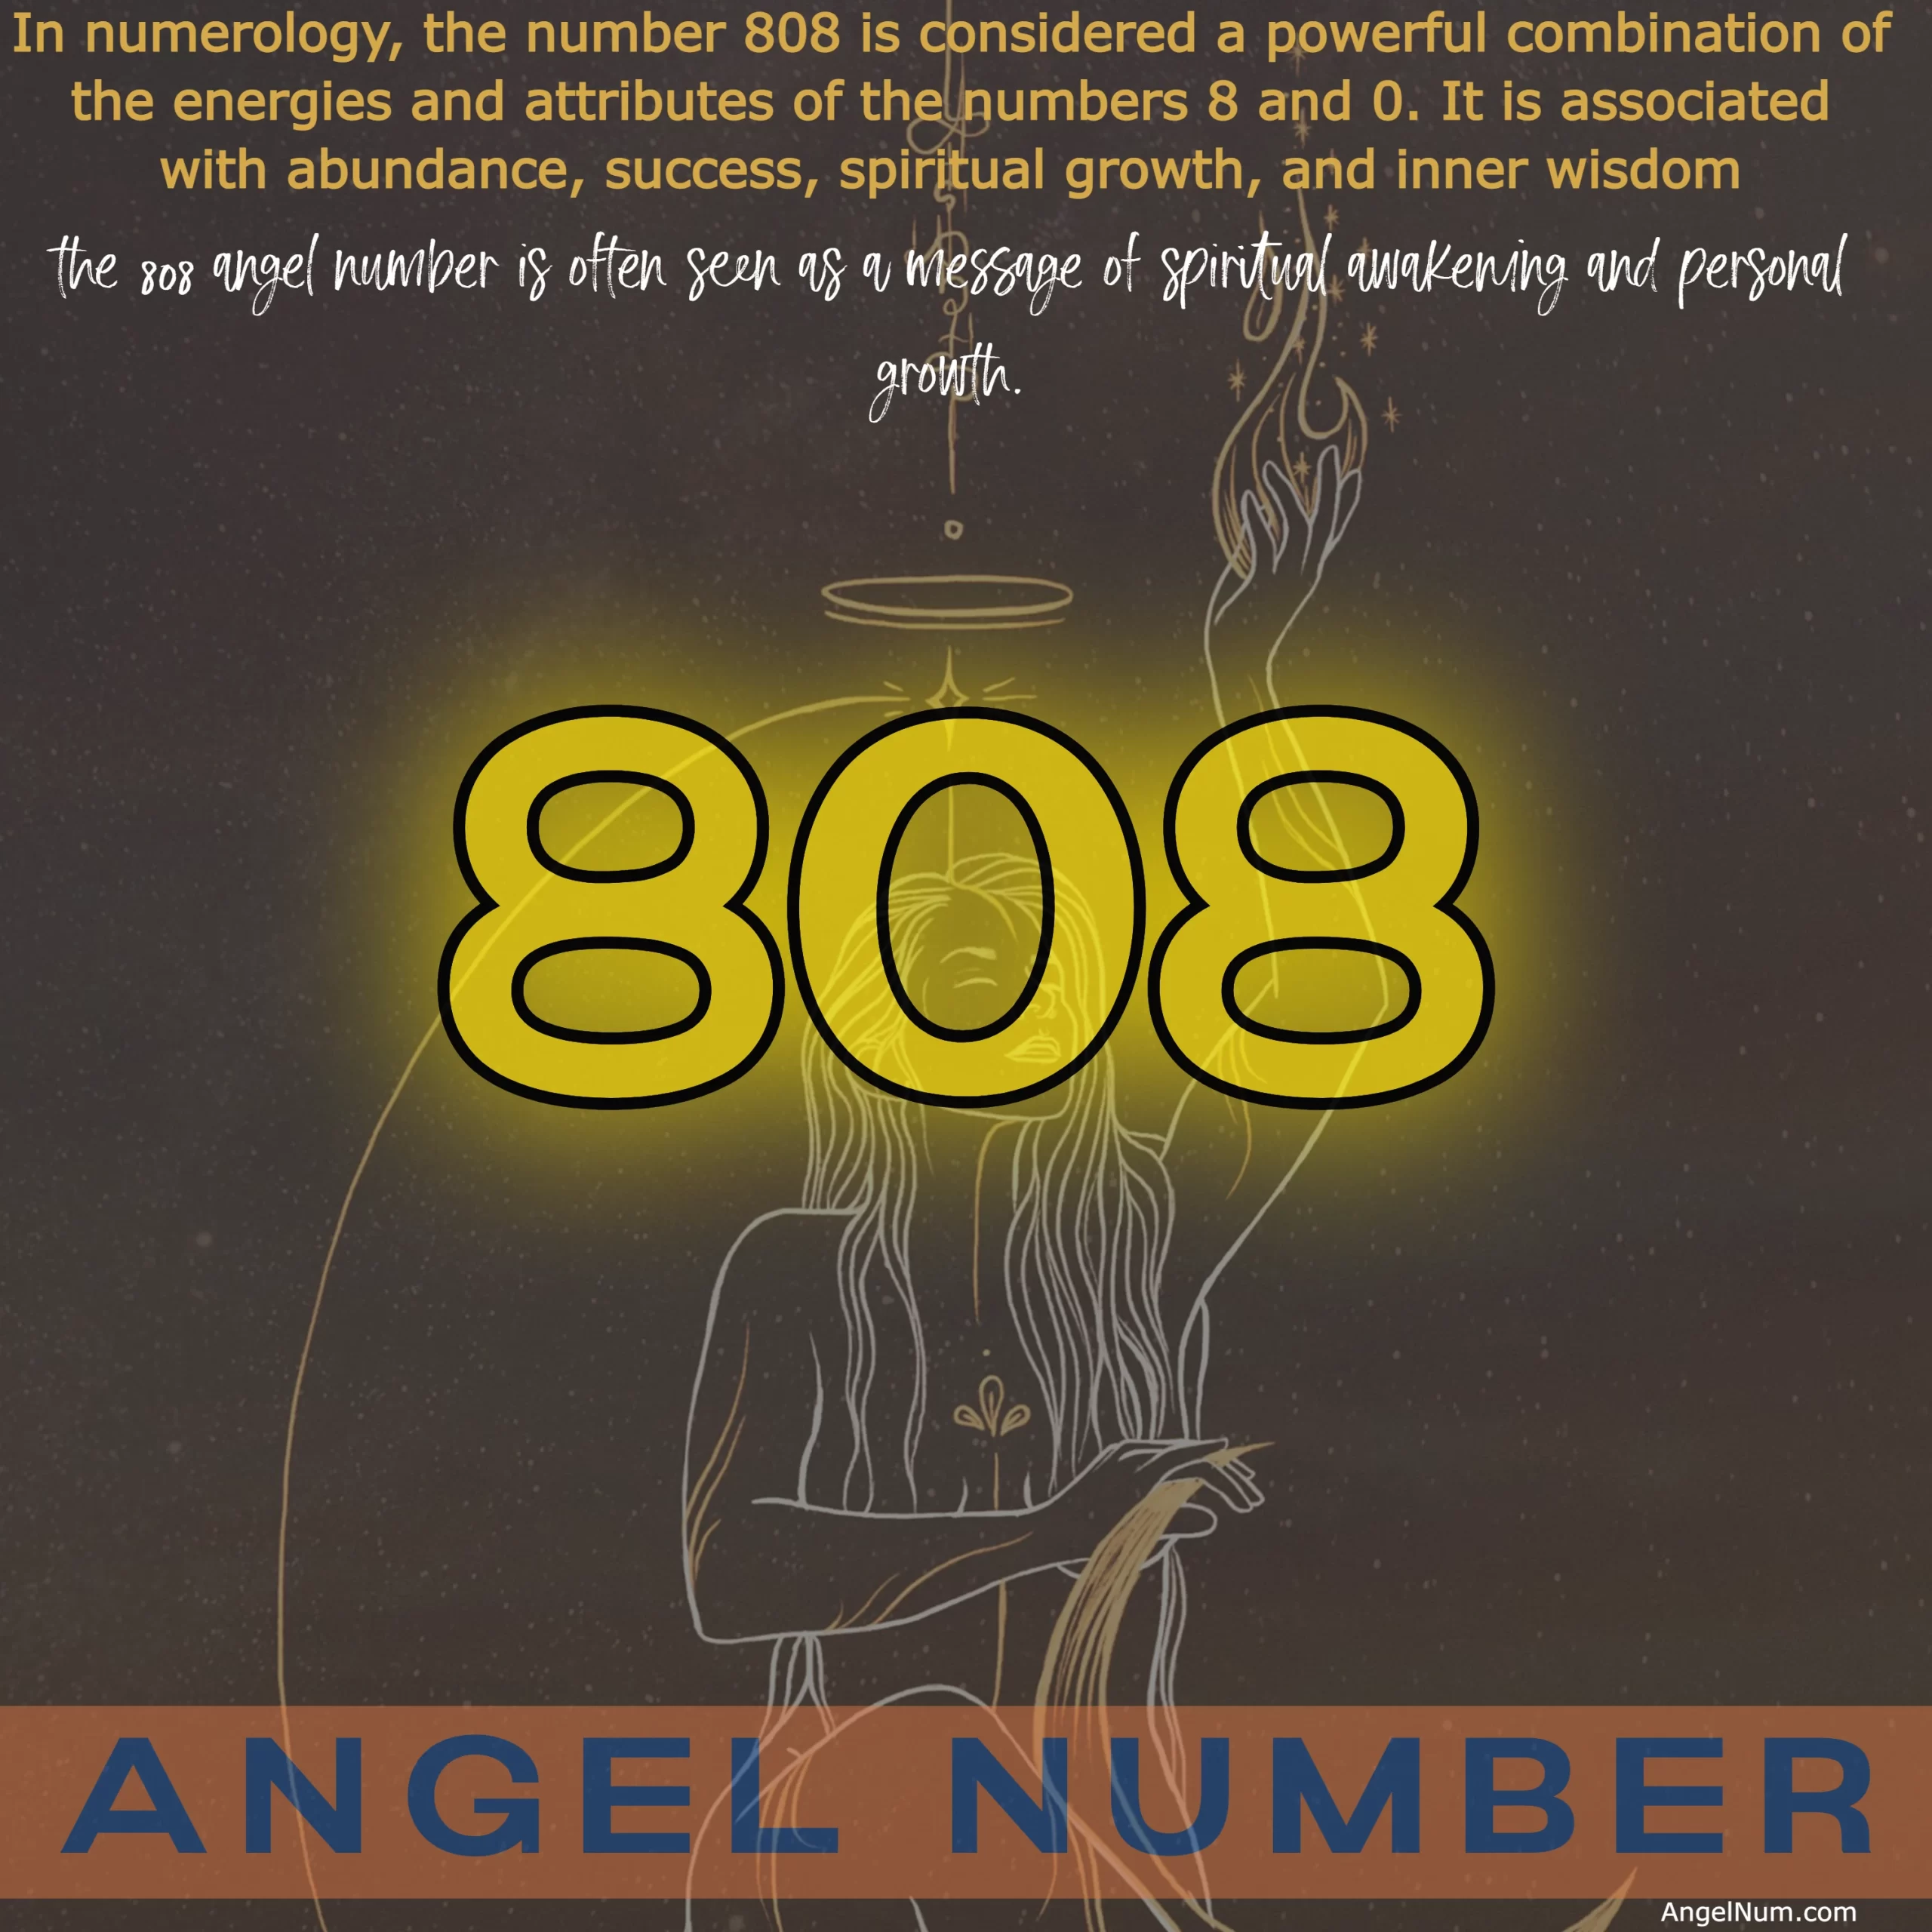 Angel Number 808: The Meaning of Abundance and Success